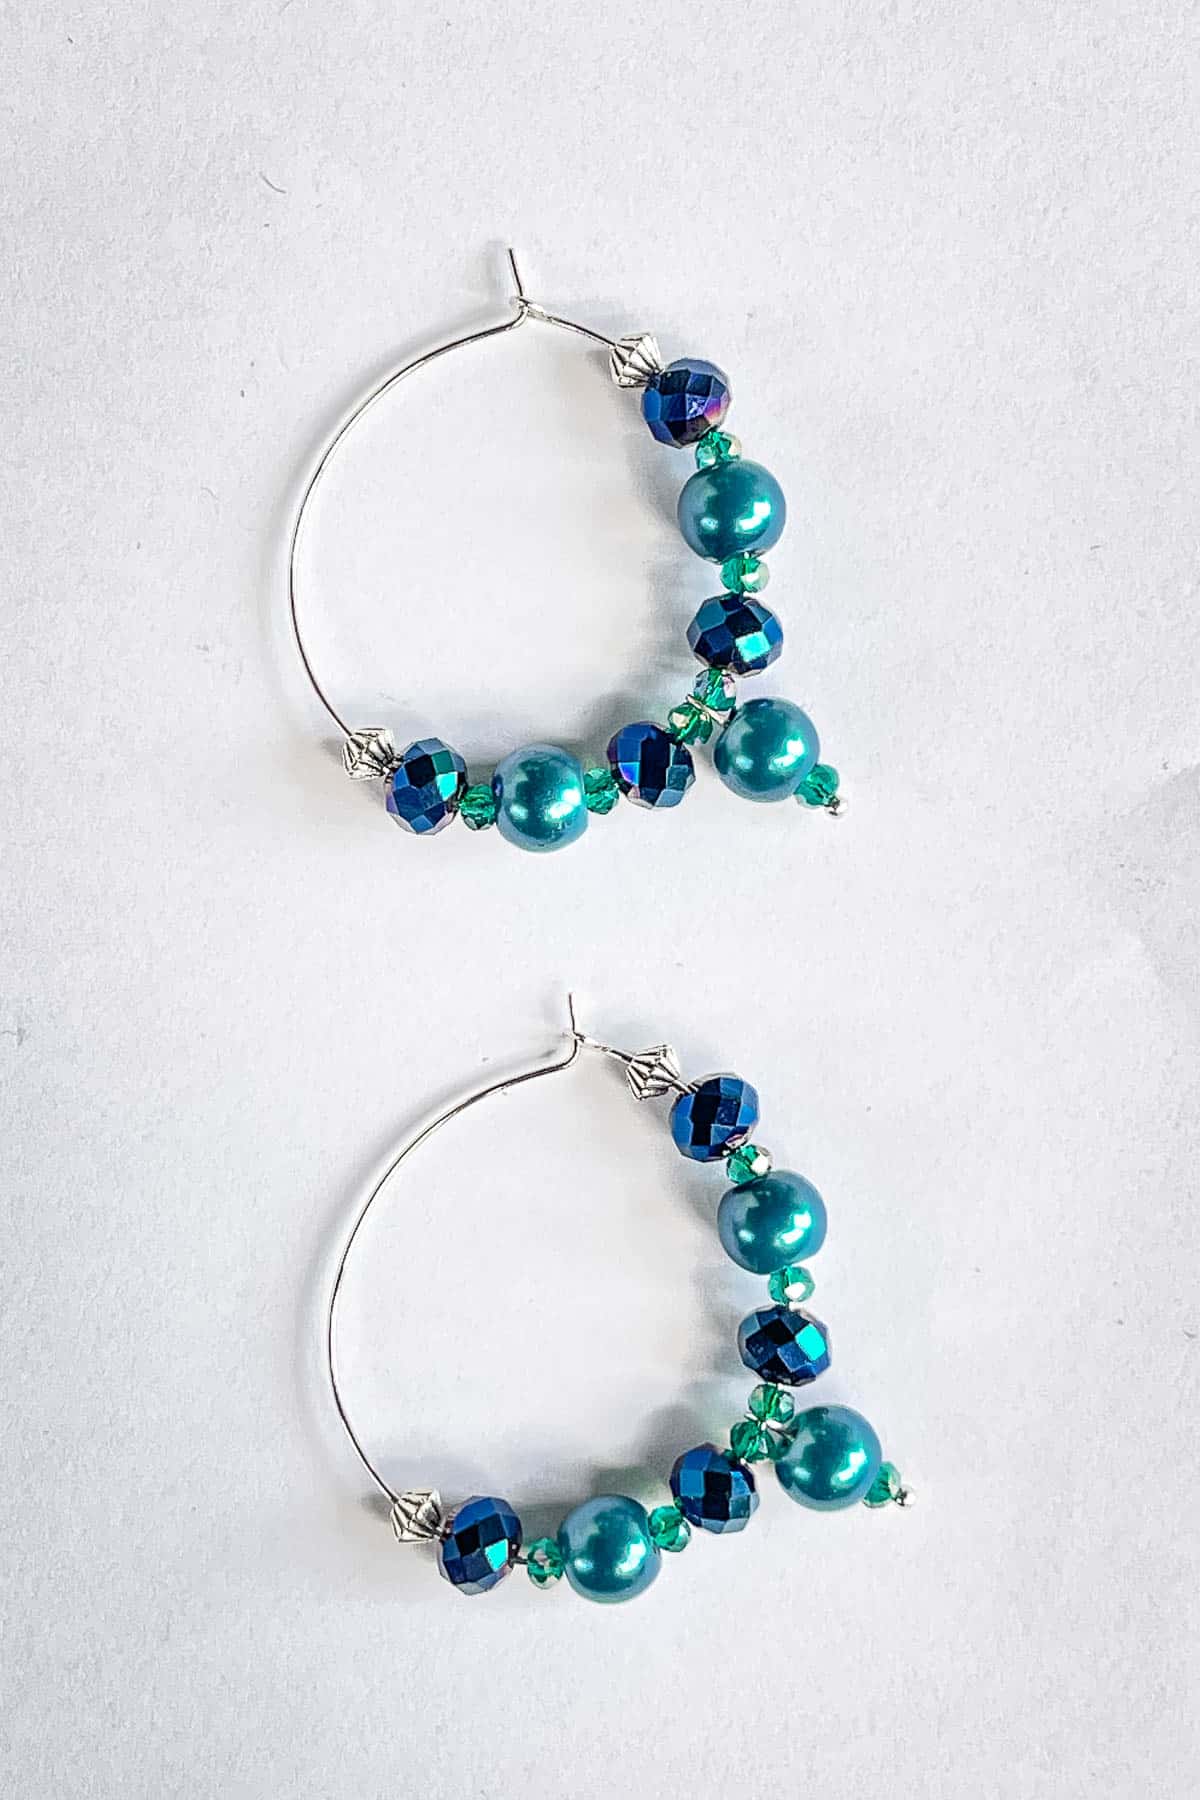 Gorgeous blue and turquoise beaded hoop earrings.